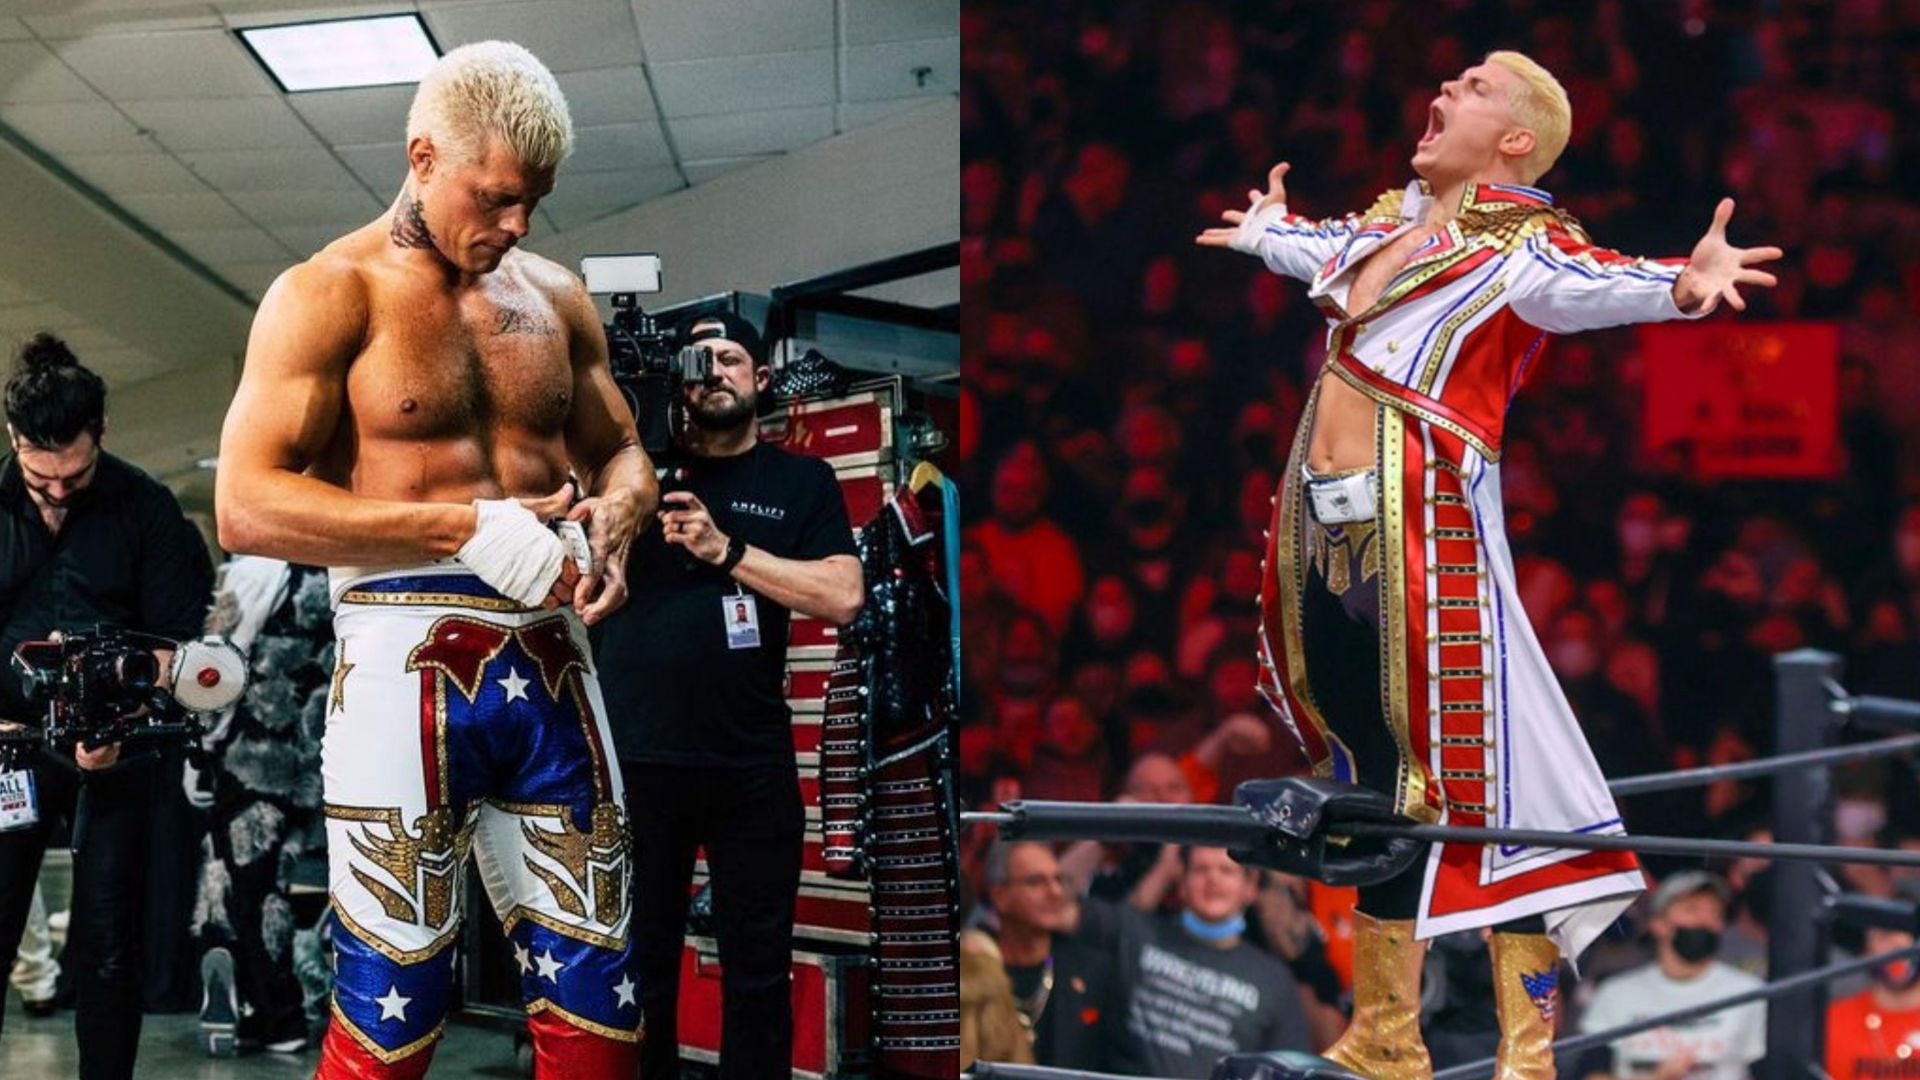 Cody Rhodes returned to WWE in April 2022